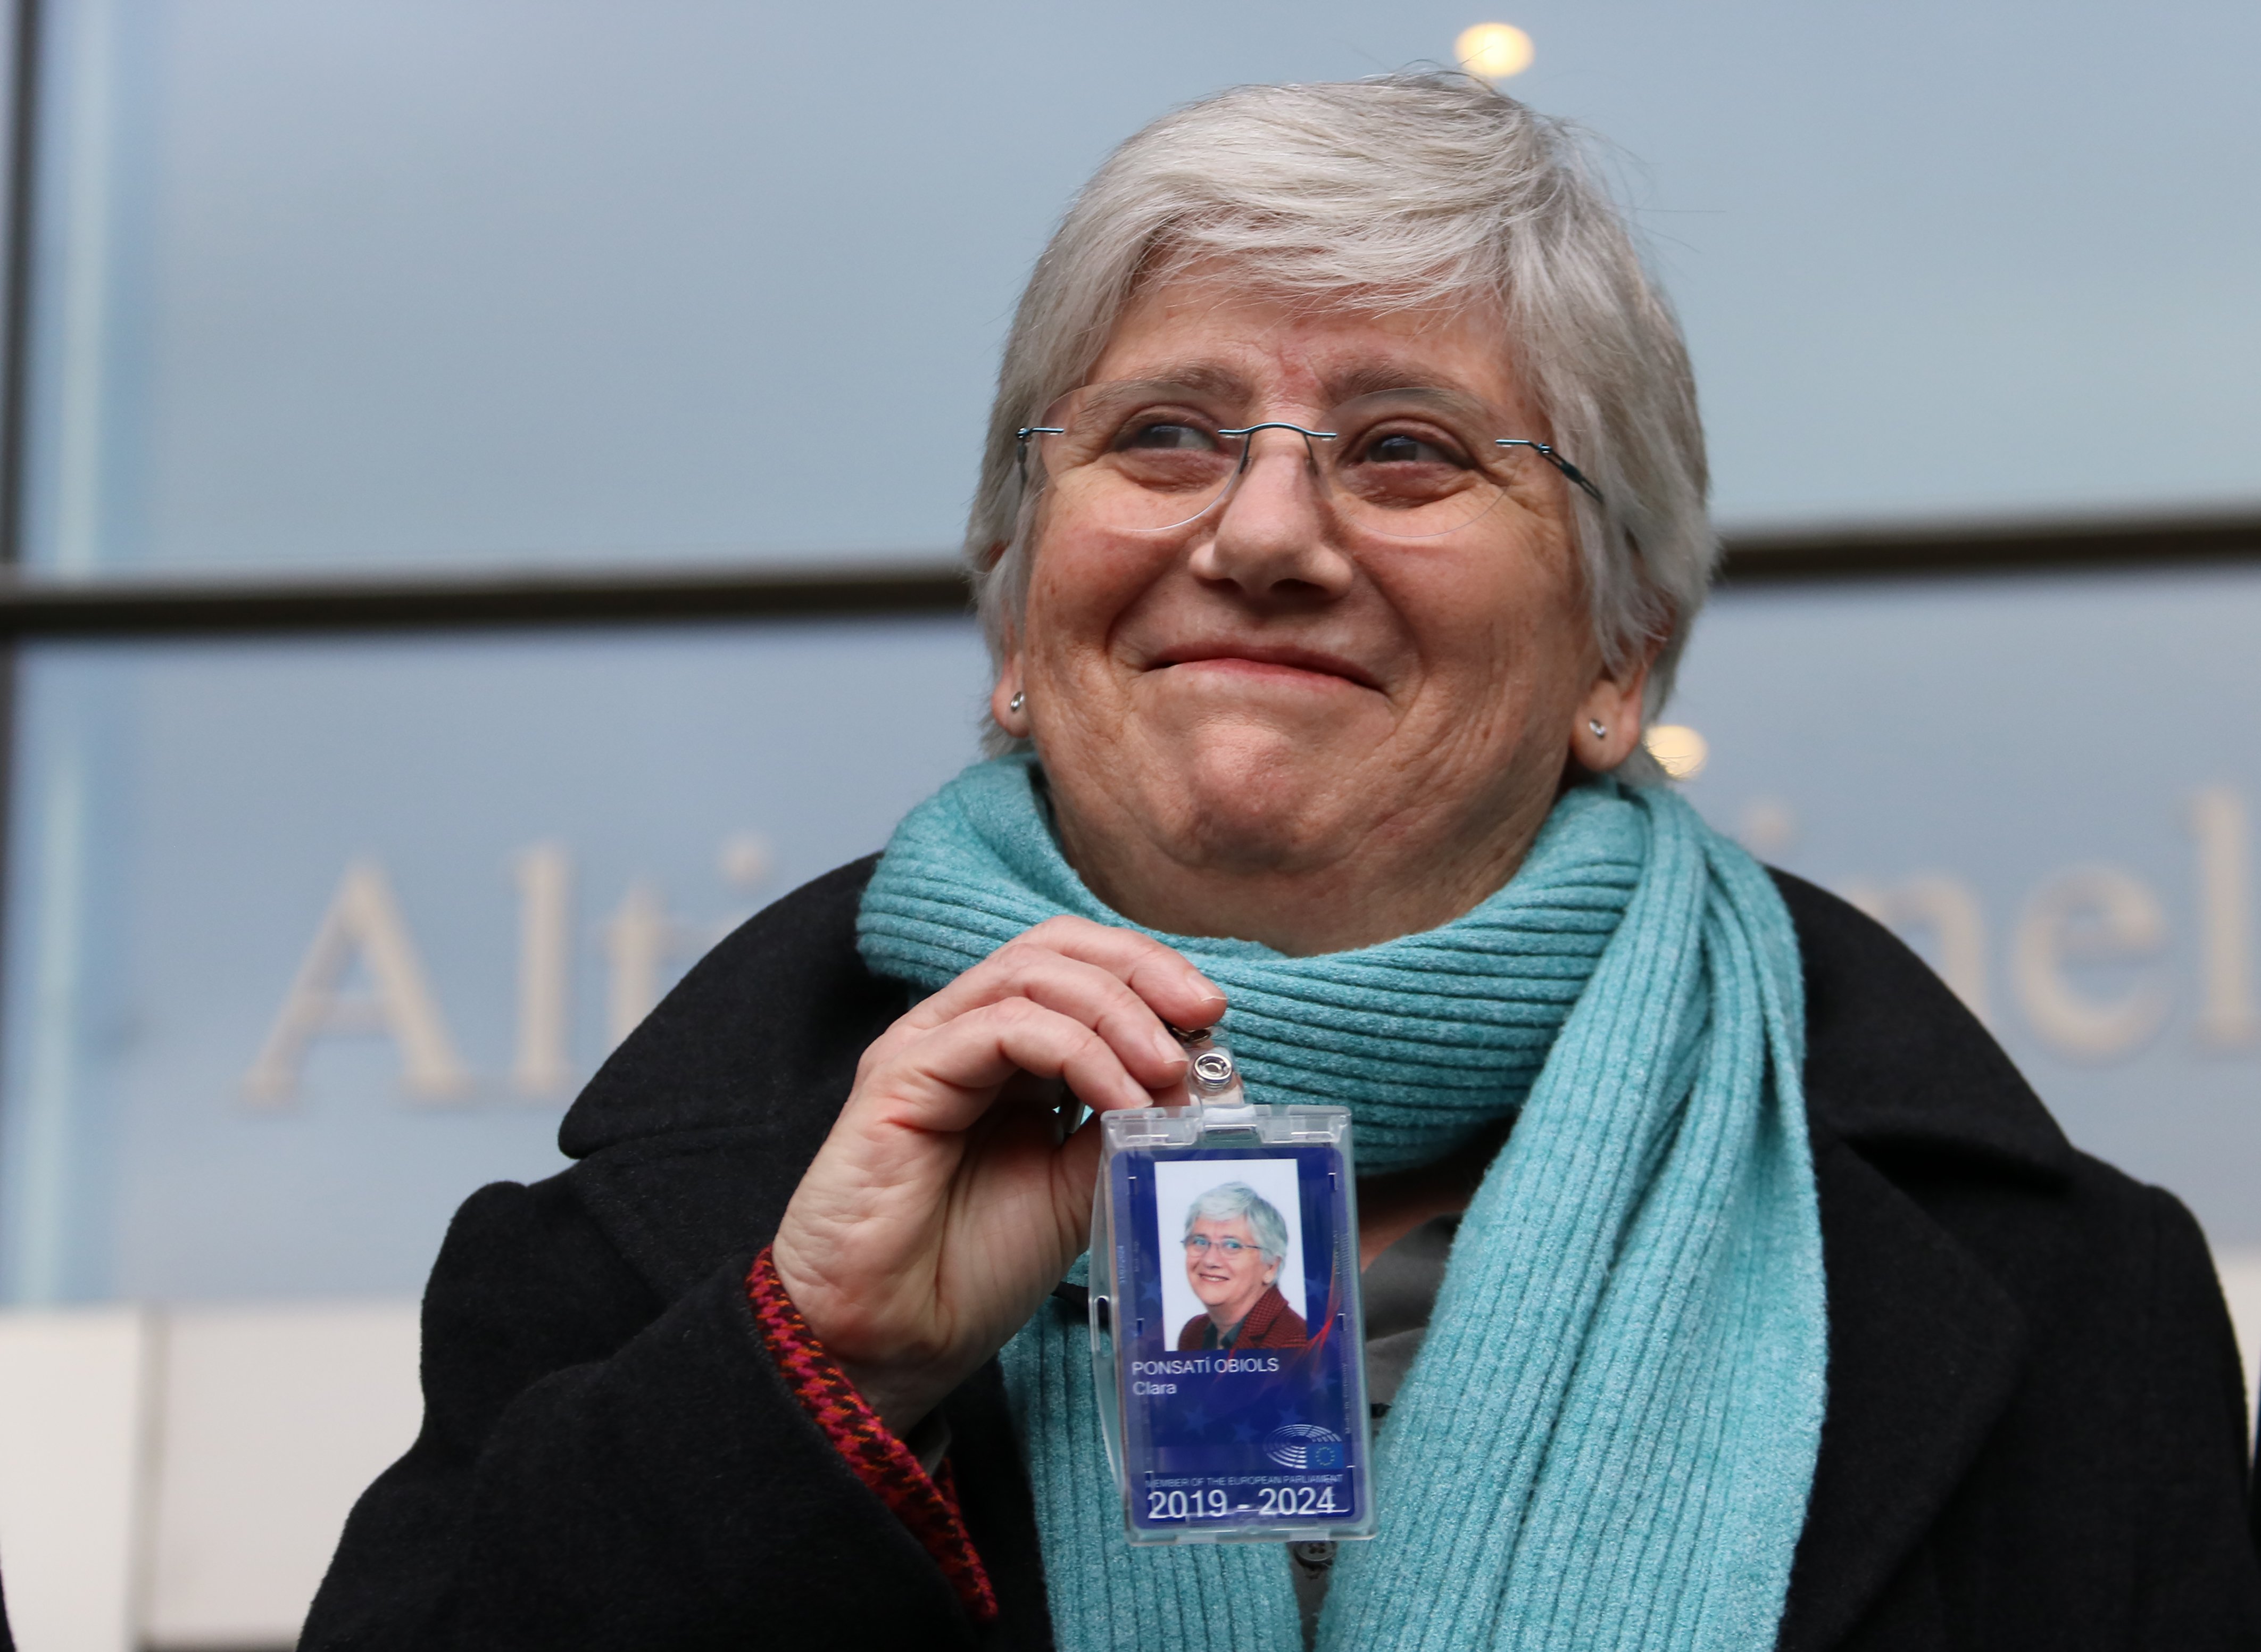 Catalan MEP Clara Ponsatí stands up for minority languages in first Brussels speech